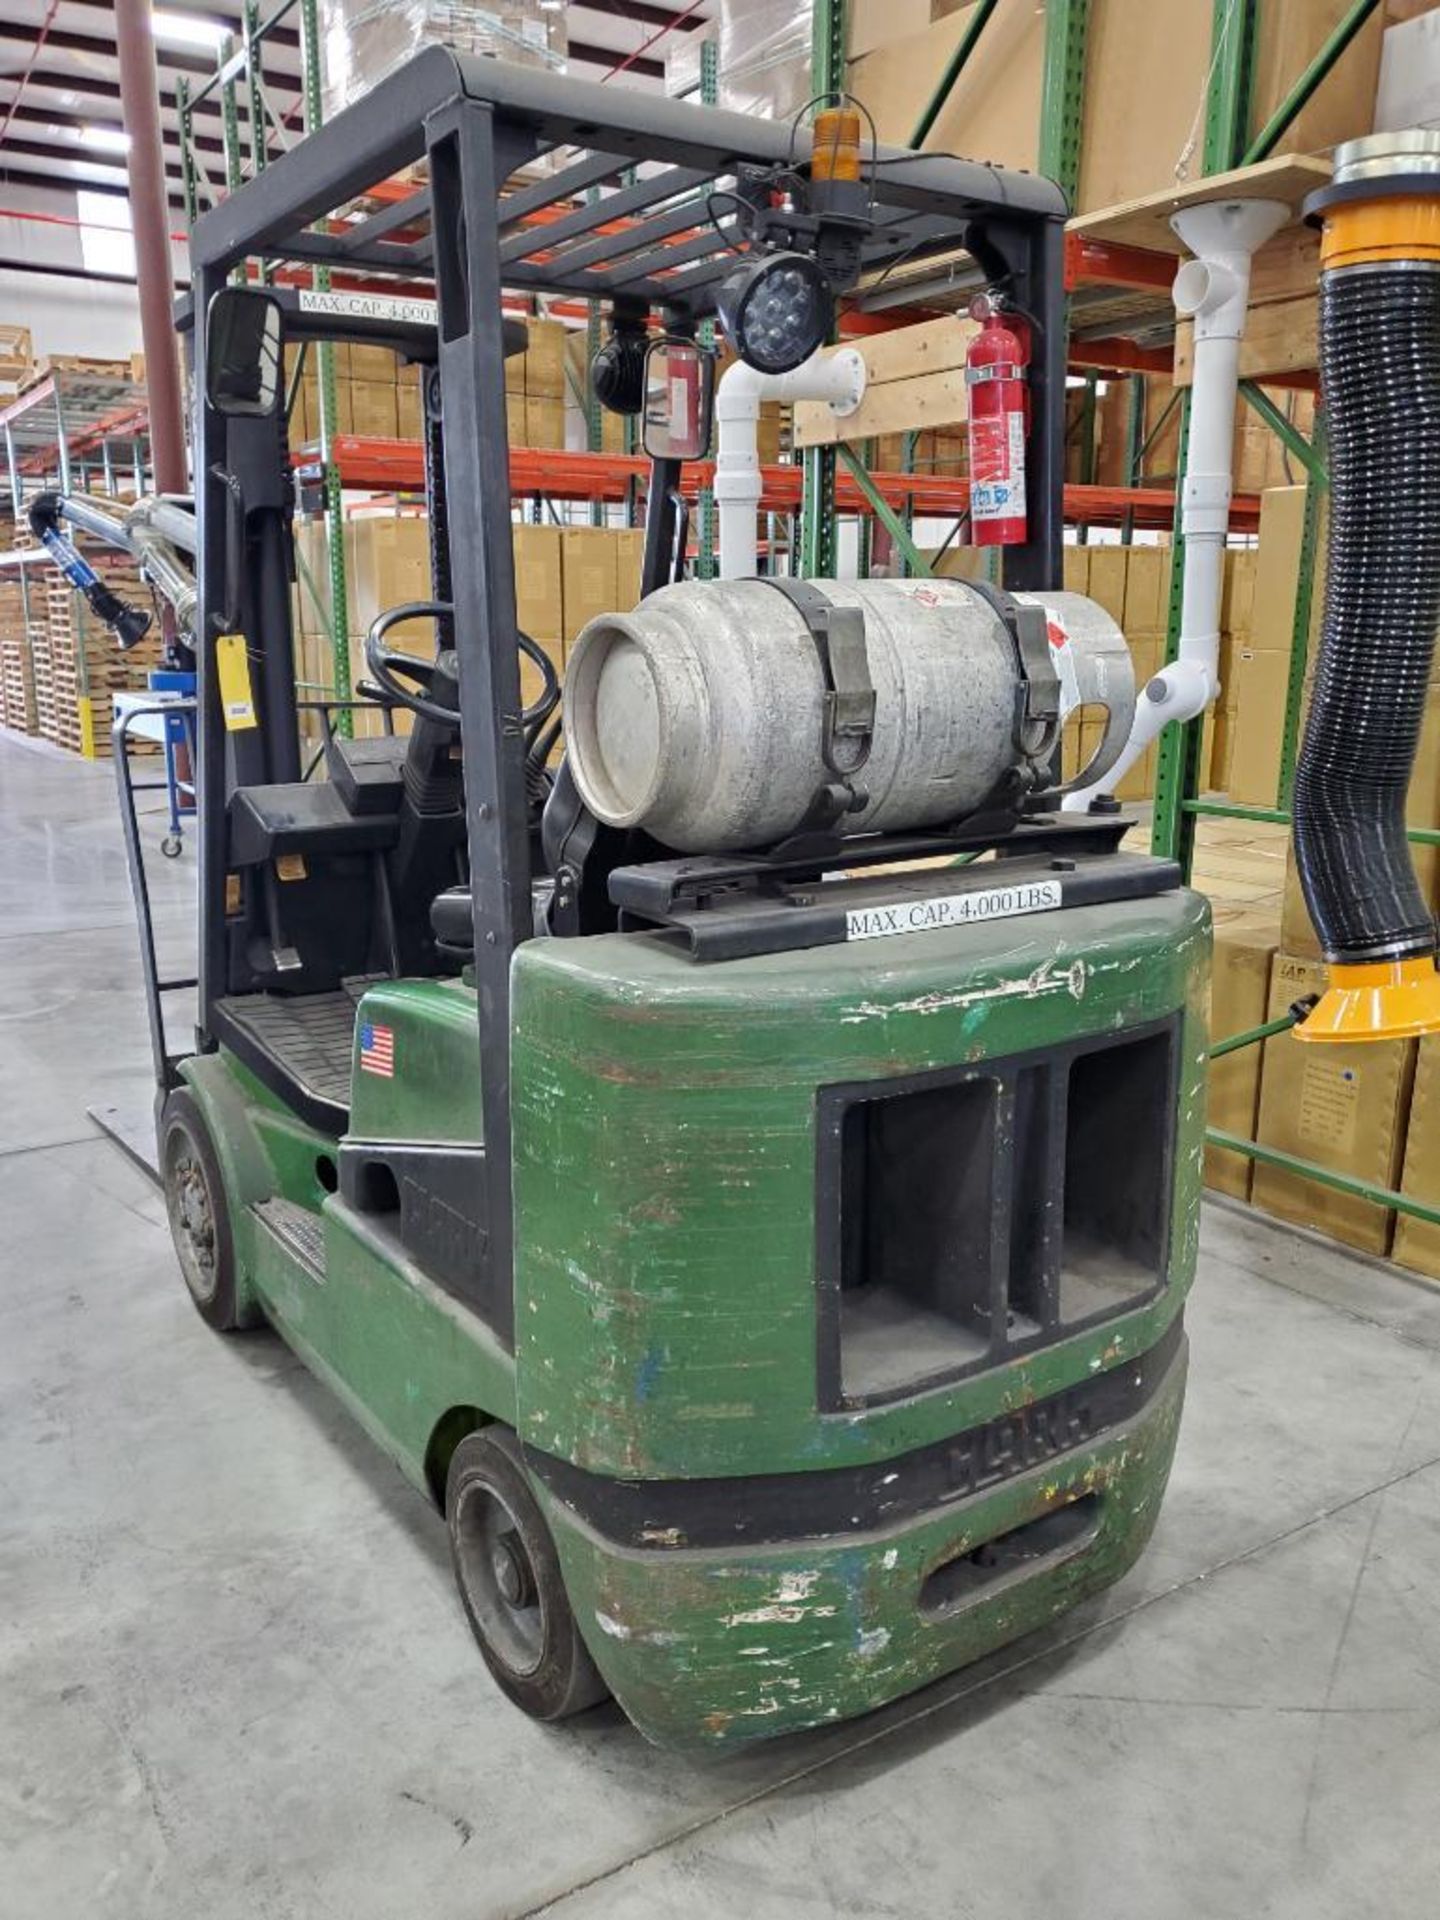 Clark 4,000 LB. Forklift, Model CGC20, S/N C365l-0052-9464FB, 130" Lift Height, 82-1/2" 2-Stage Mast - Image 10 of 10